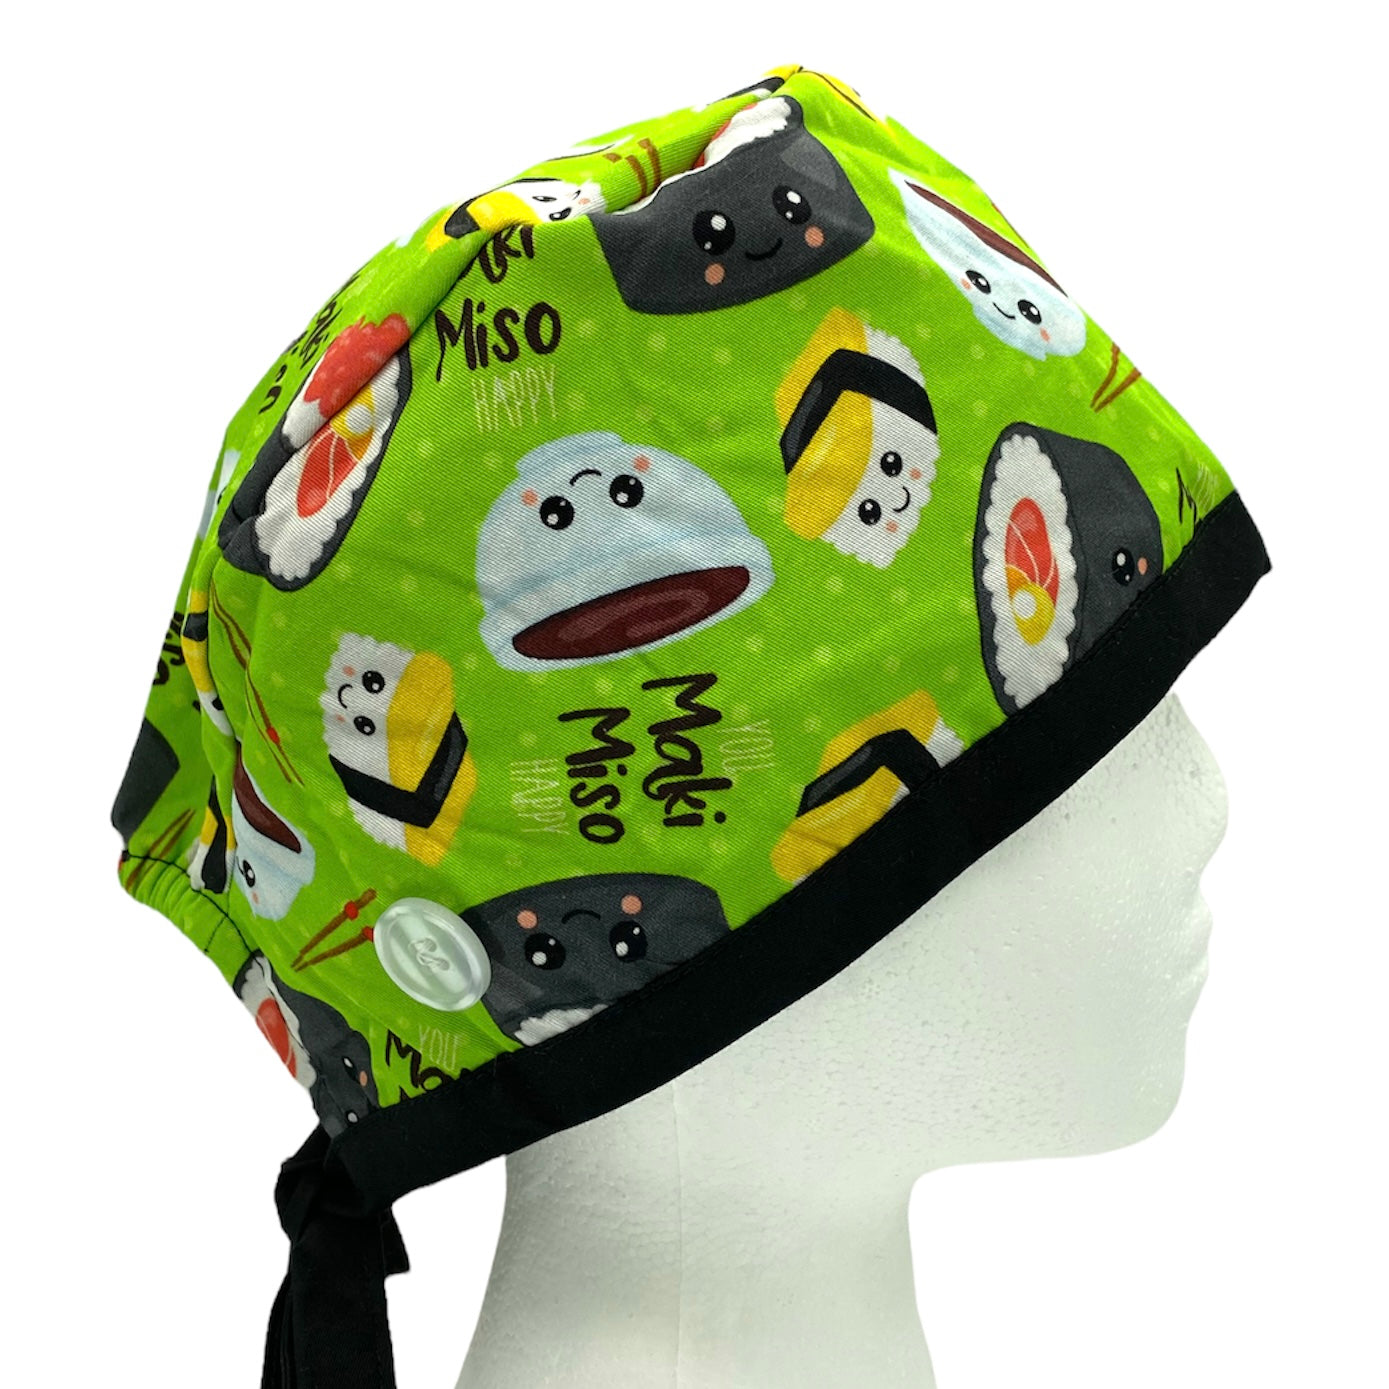 sushi japanese "maki miso happy" surgical scrub cap with buttons by sunshine shops co